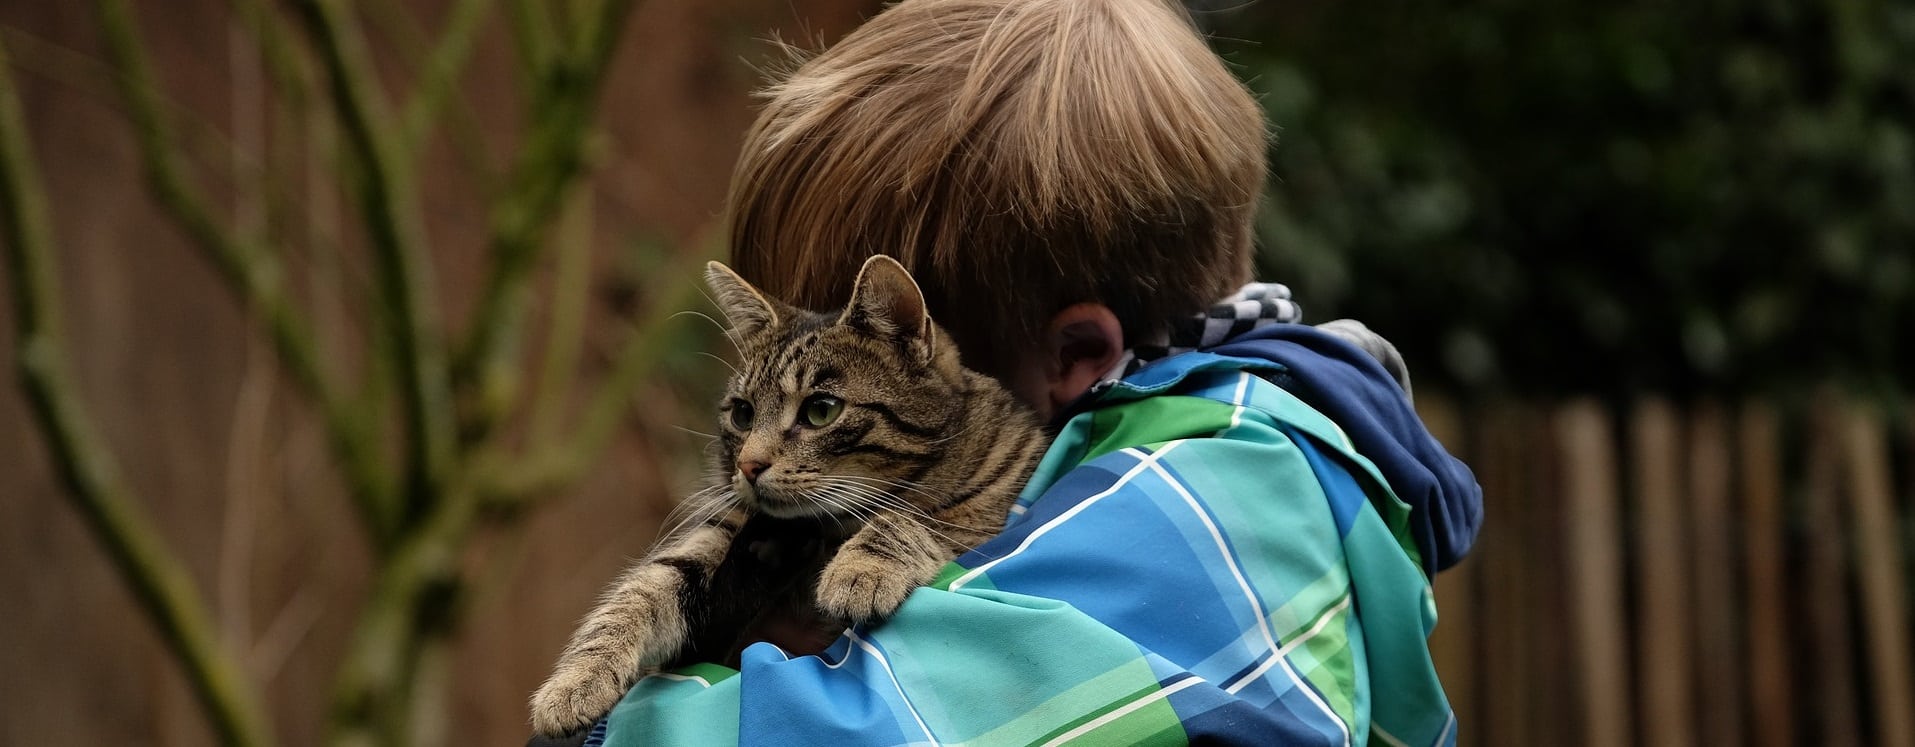 Child in blue and green sweatshirt hugging a cat. Image by Westfale from Pixabay.